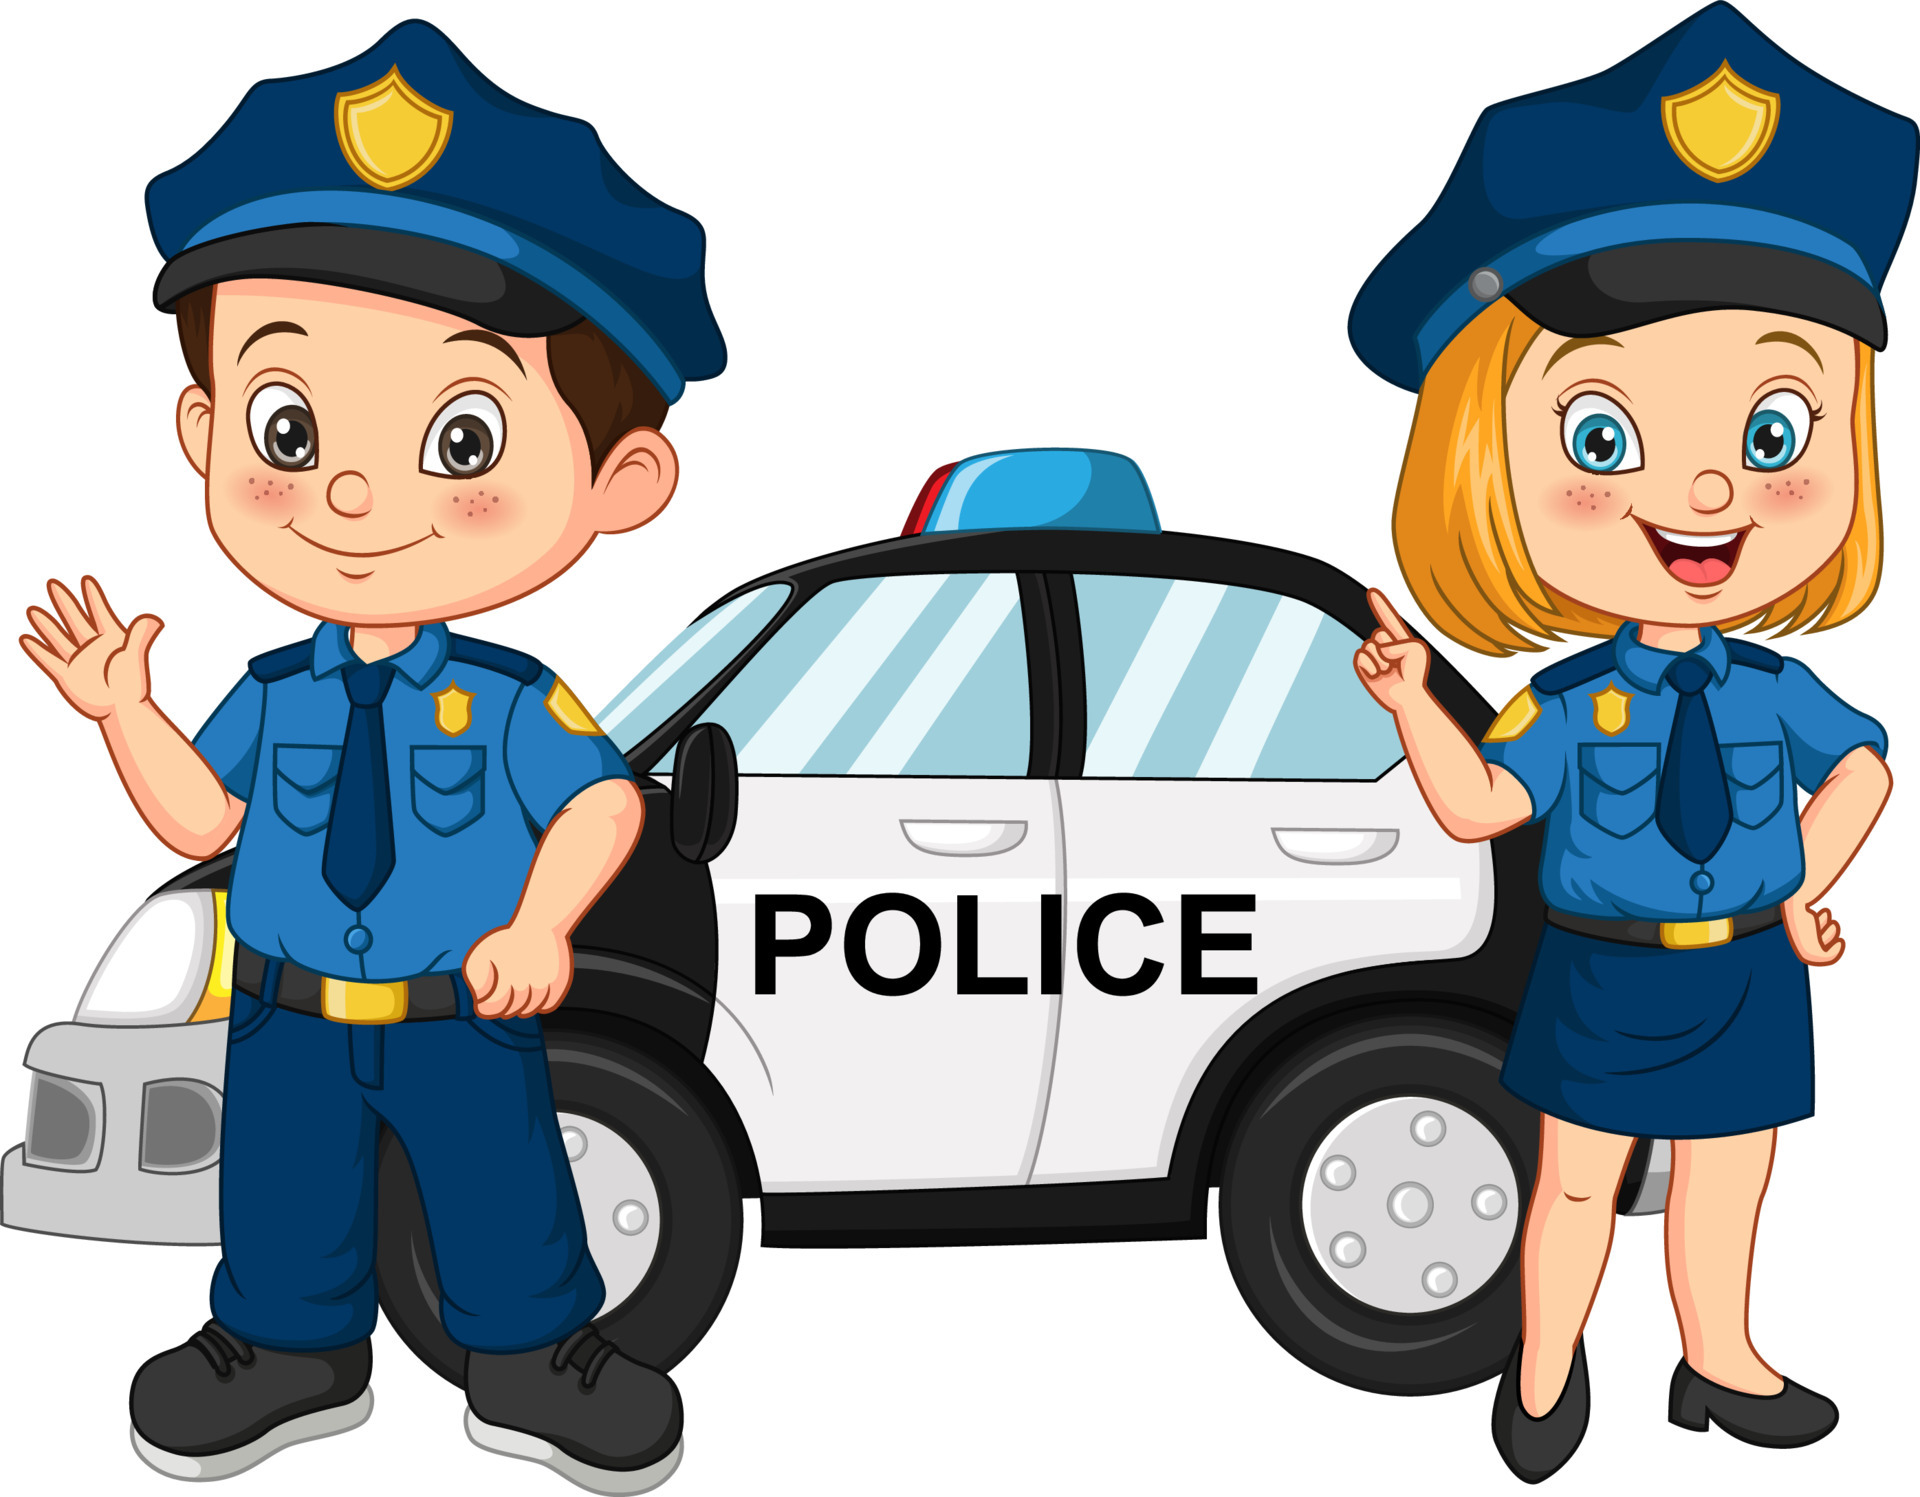 Police Cartoon Vector Art, Icons, and Graphics for Free Download